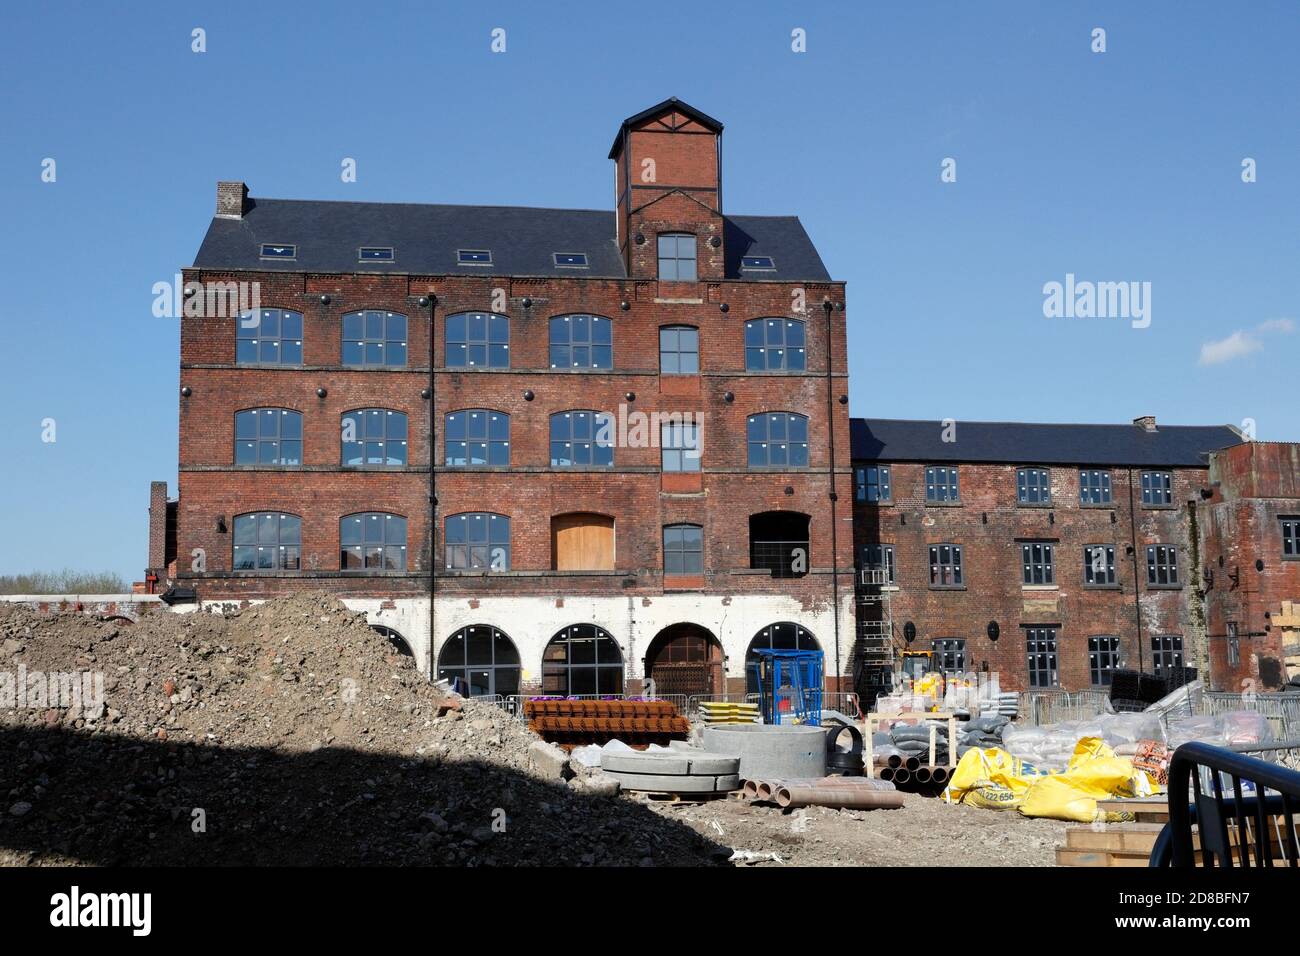 Green lane works, Kelham island sheffield England UK, during renovation and redevelopment. Victorian industrial building works Stock Photo